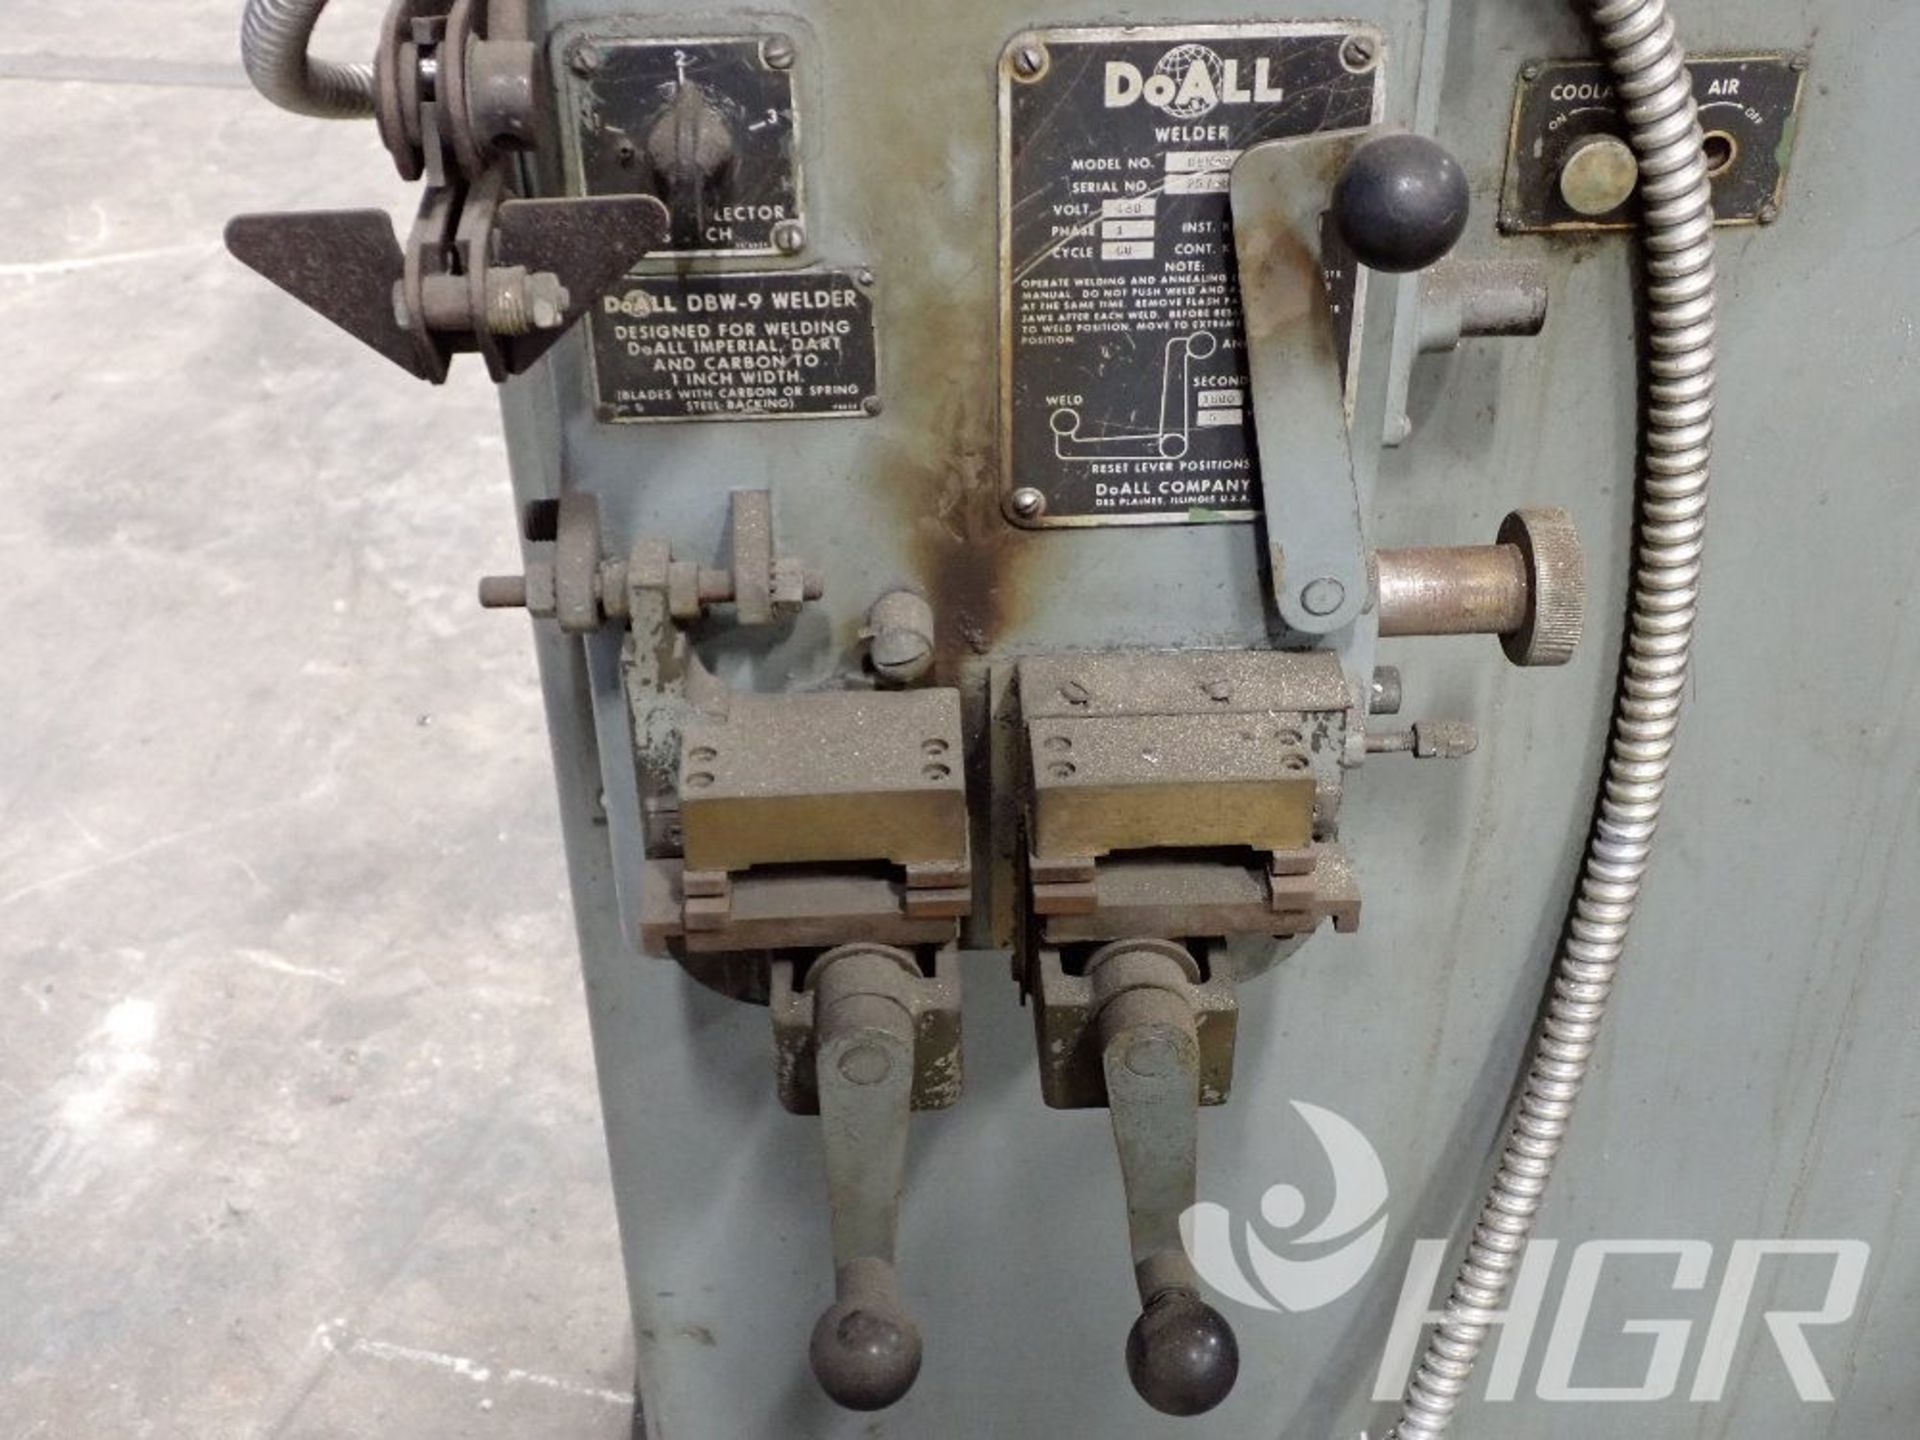 DOALL BANDSAW, Model 3612-3. , Date: n/a; s/n 153-691067, Approx. Capacity: 16", Power: n/a, - Image 21 of 29